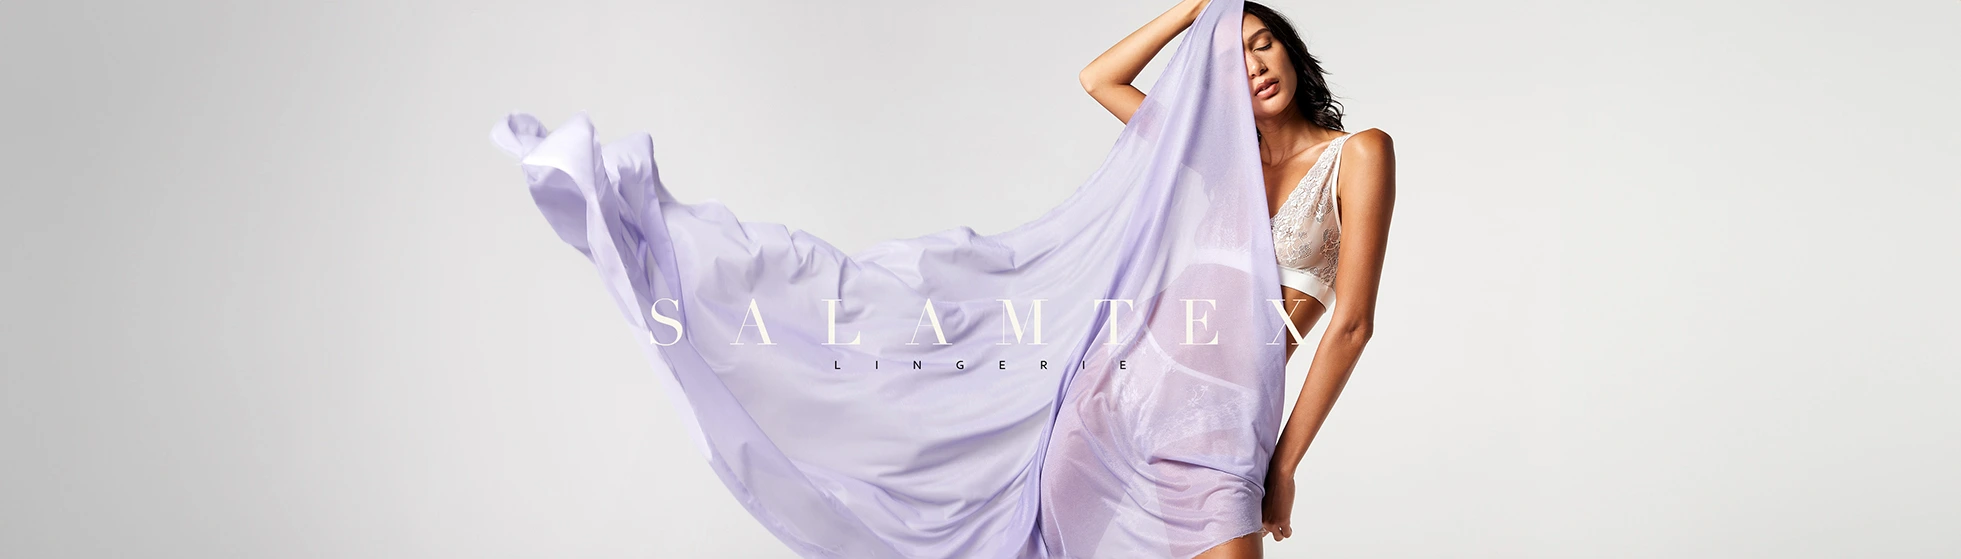 SALAMTEX LINGERIE LOOKBOOK PHOTOGRAPHY , A woman in lingerie posing with a purple scarf.